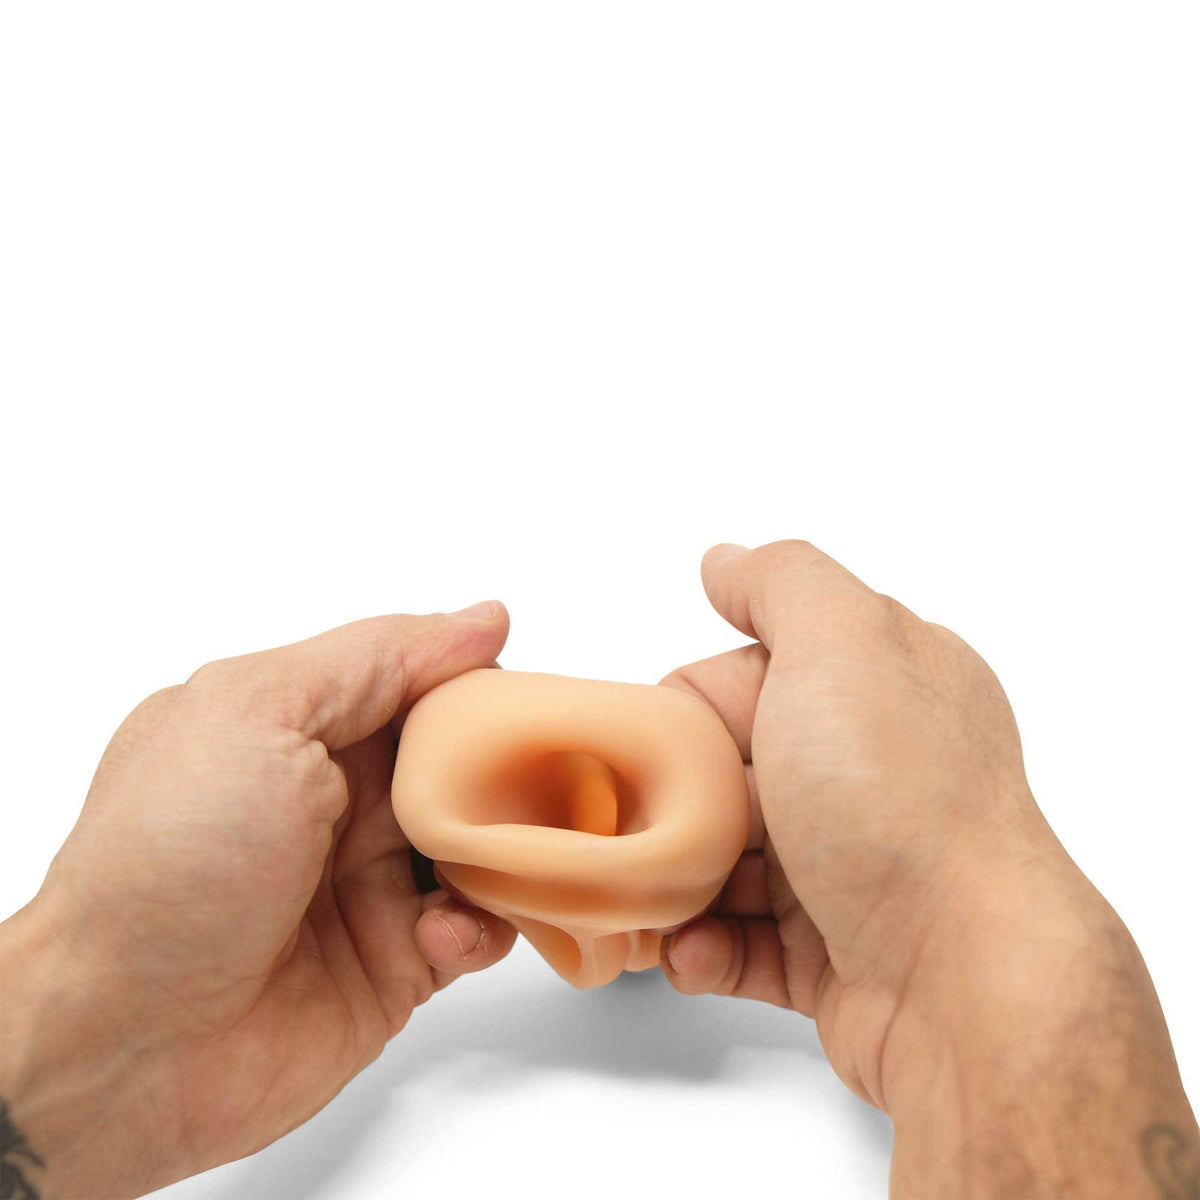 Natural 6 Inch Penis Extension Sleeve for Men by Healthy Vibes Cock Sheaths